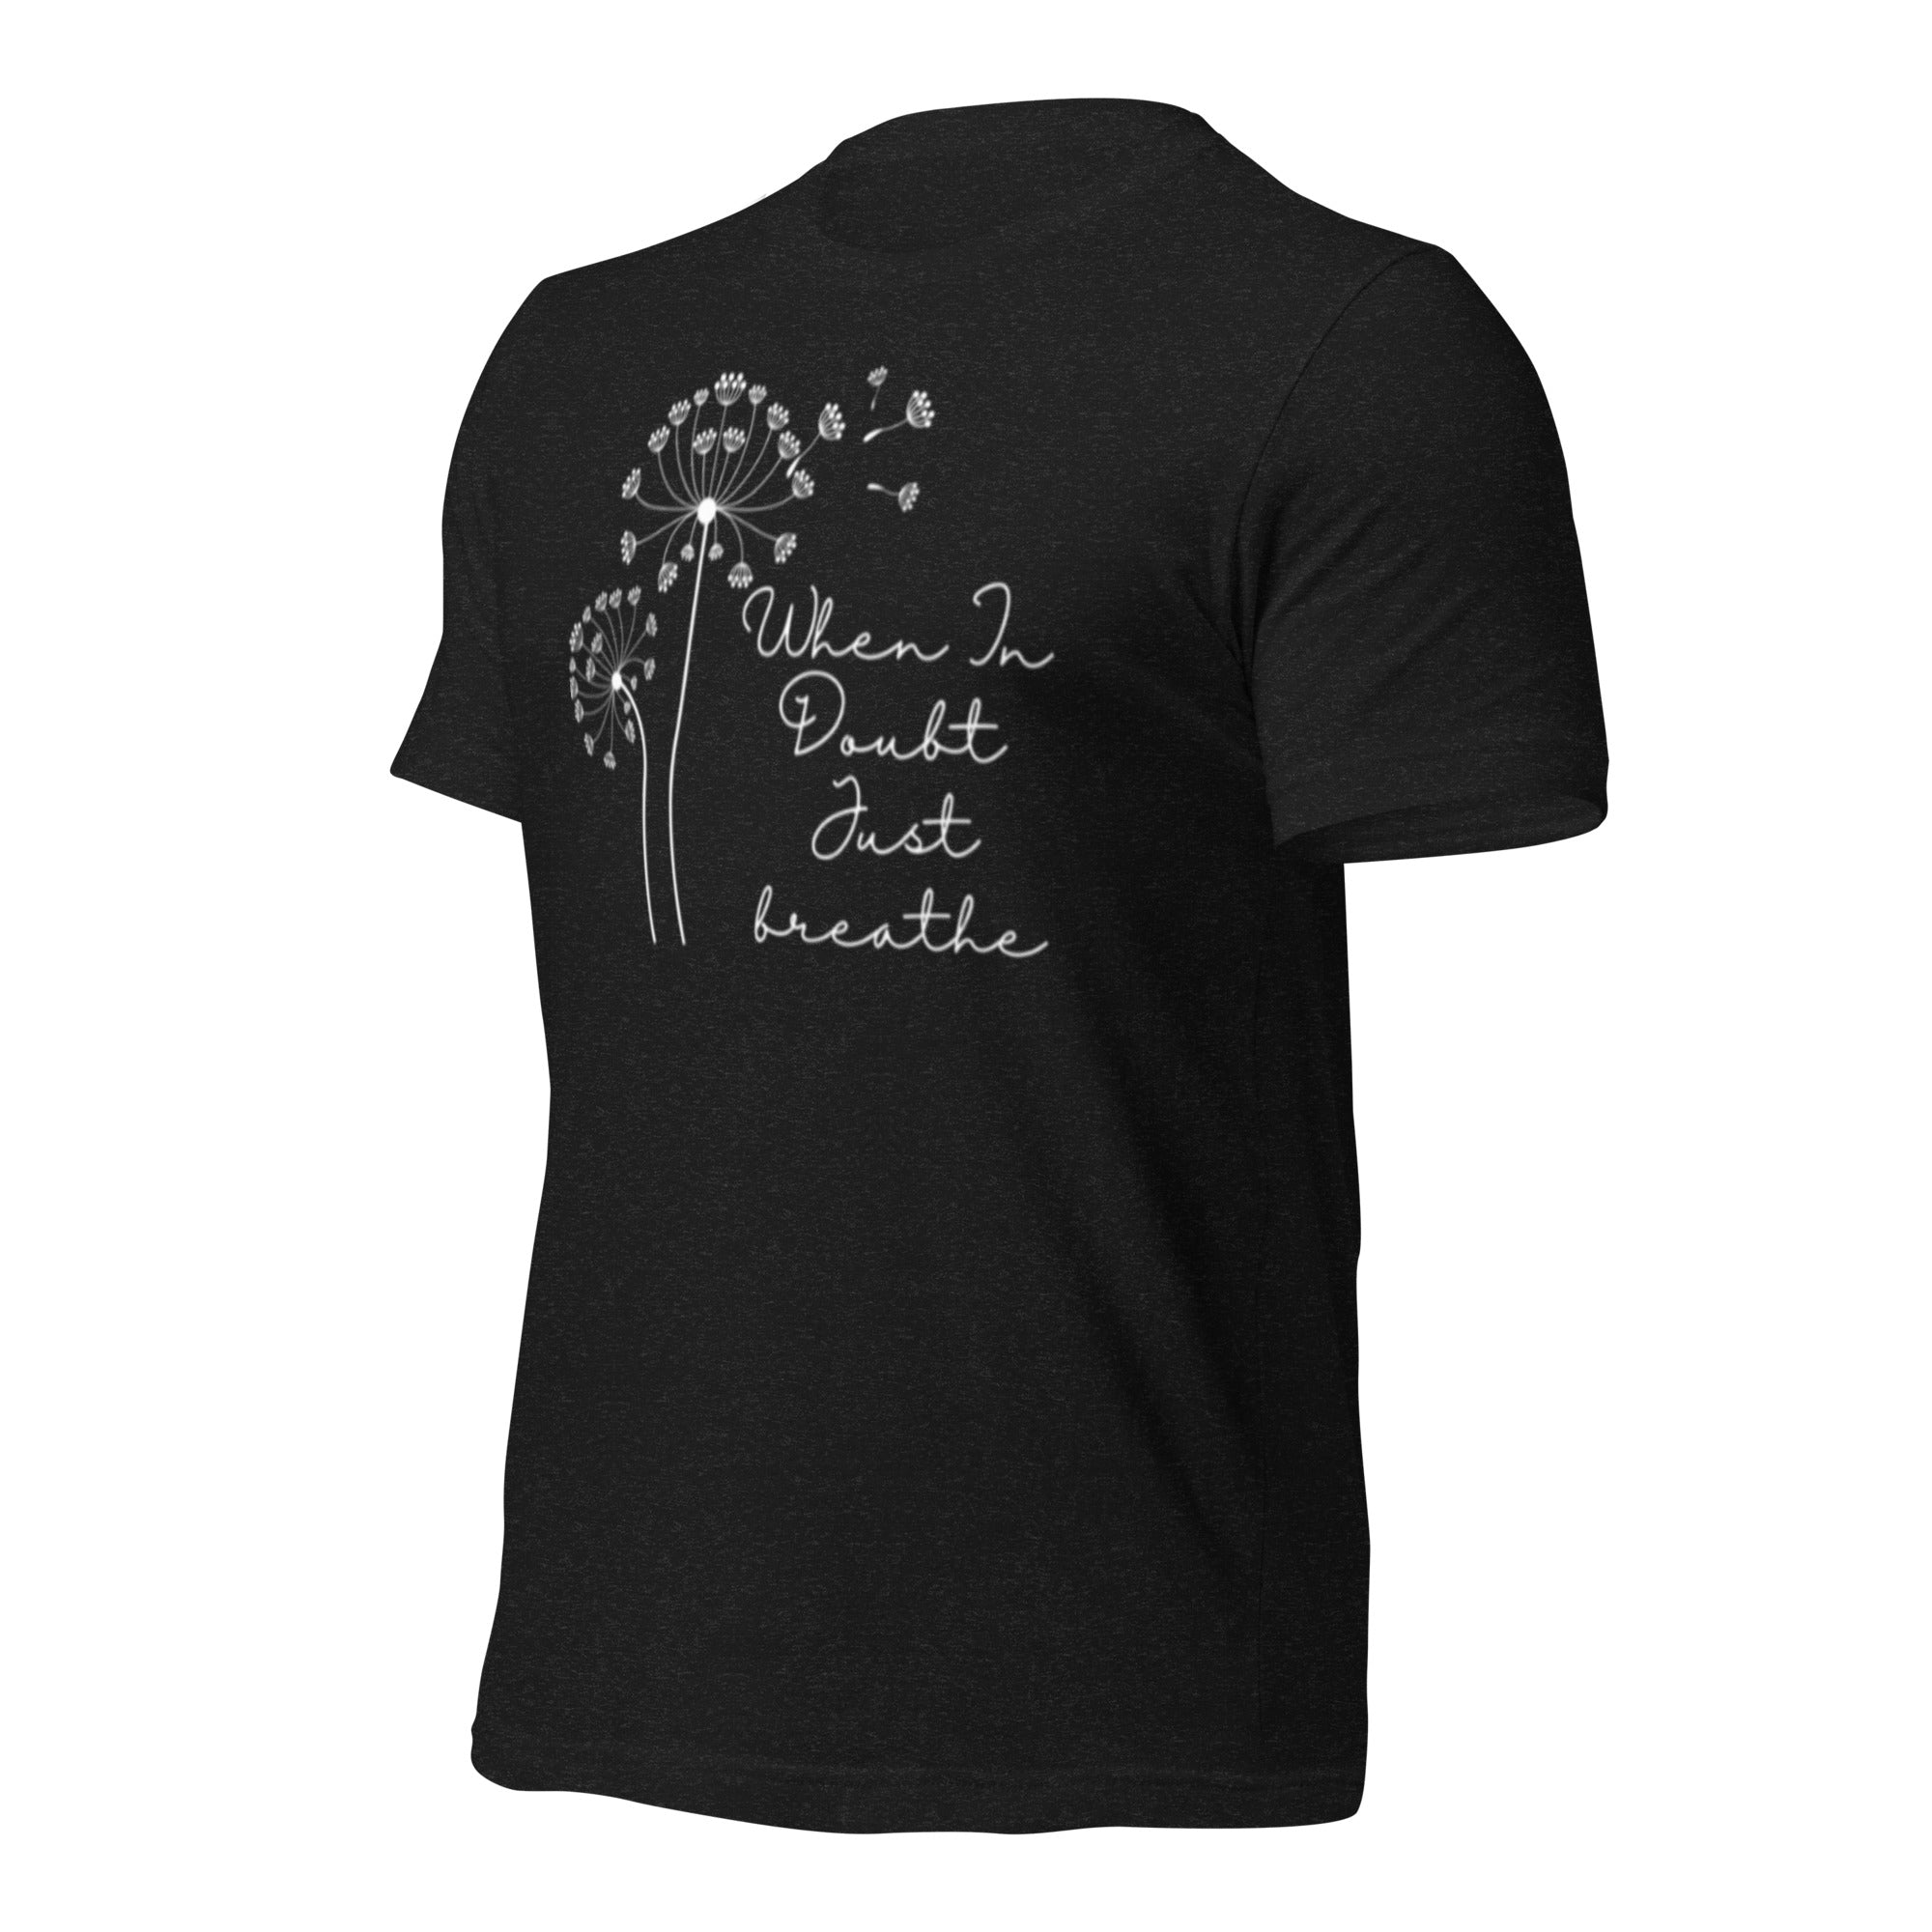 Yoga Gift with Positive Quote - "When in Doubt, Just Breathe" T-Shirt - Meditation Shirt  - Ladies Shirt - Positive Quote- Unisex - PennyJellies